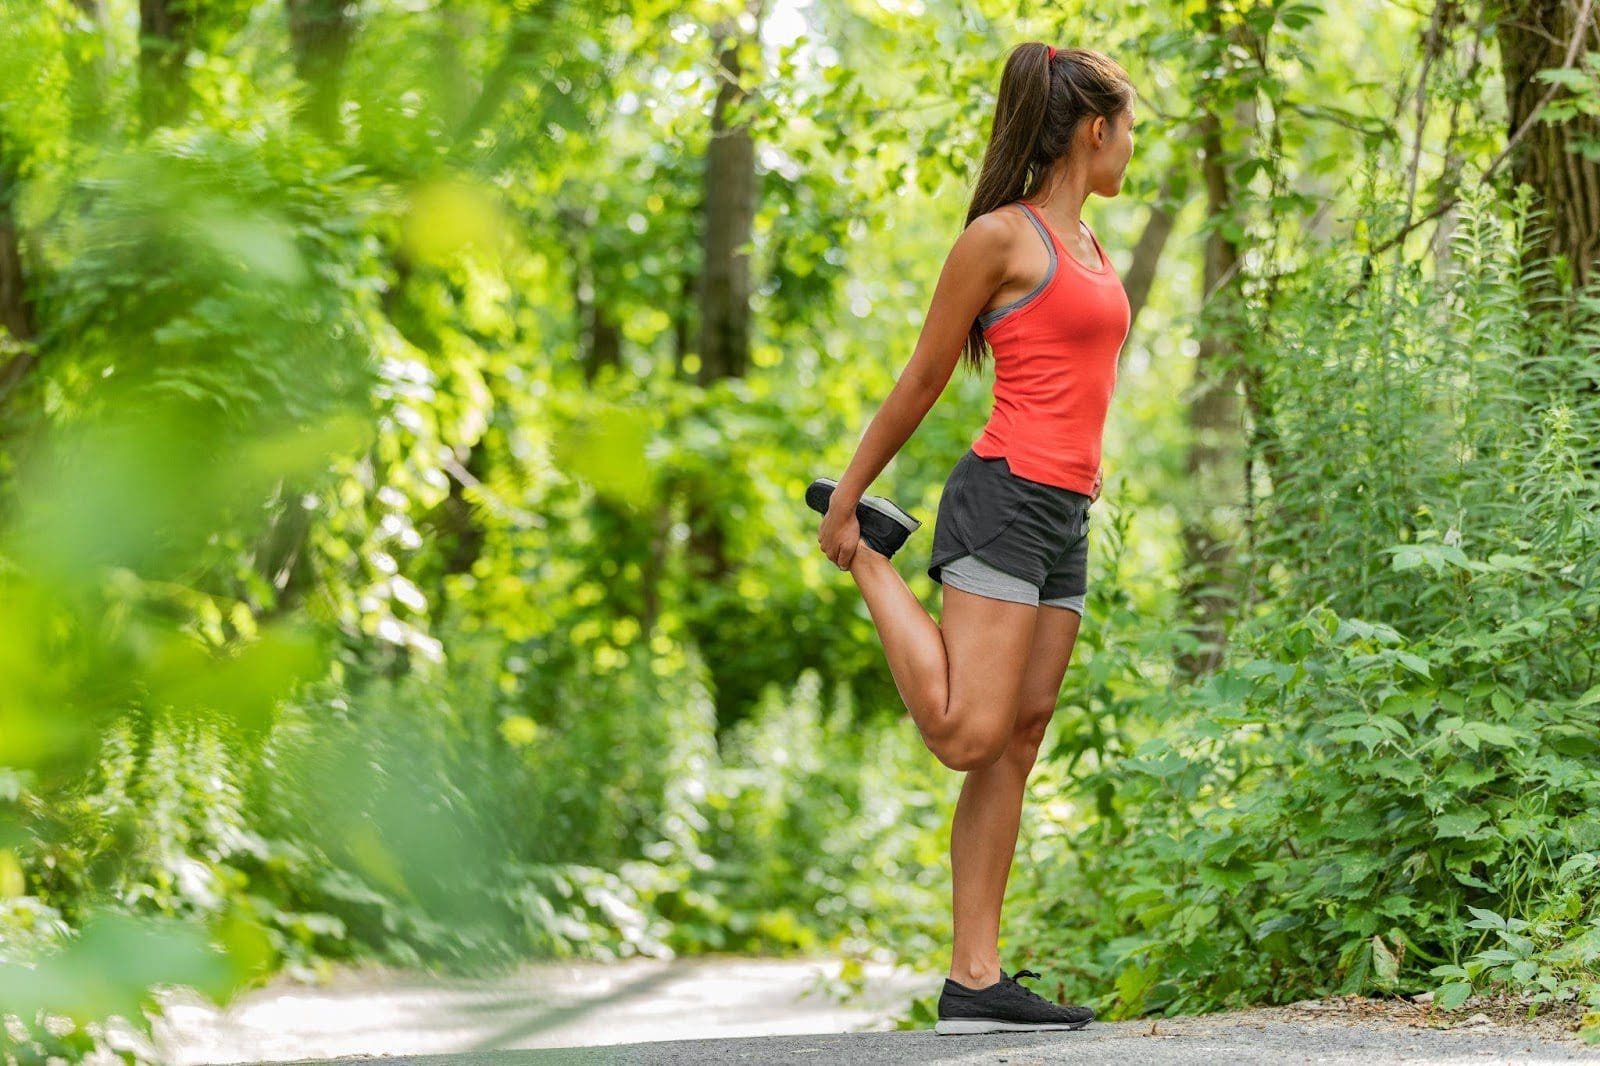 Woman stretching her thigh on a forested path.